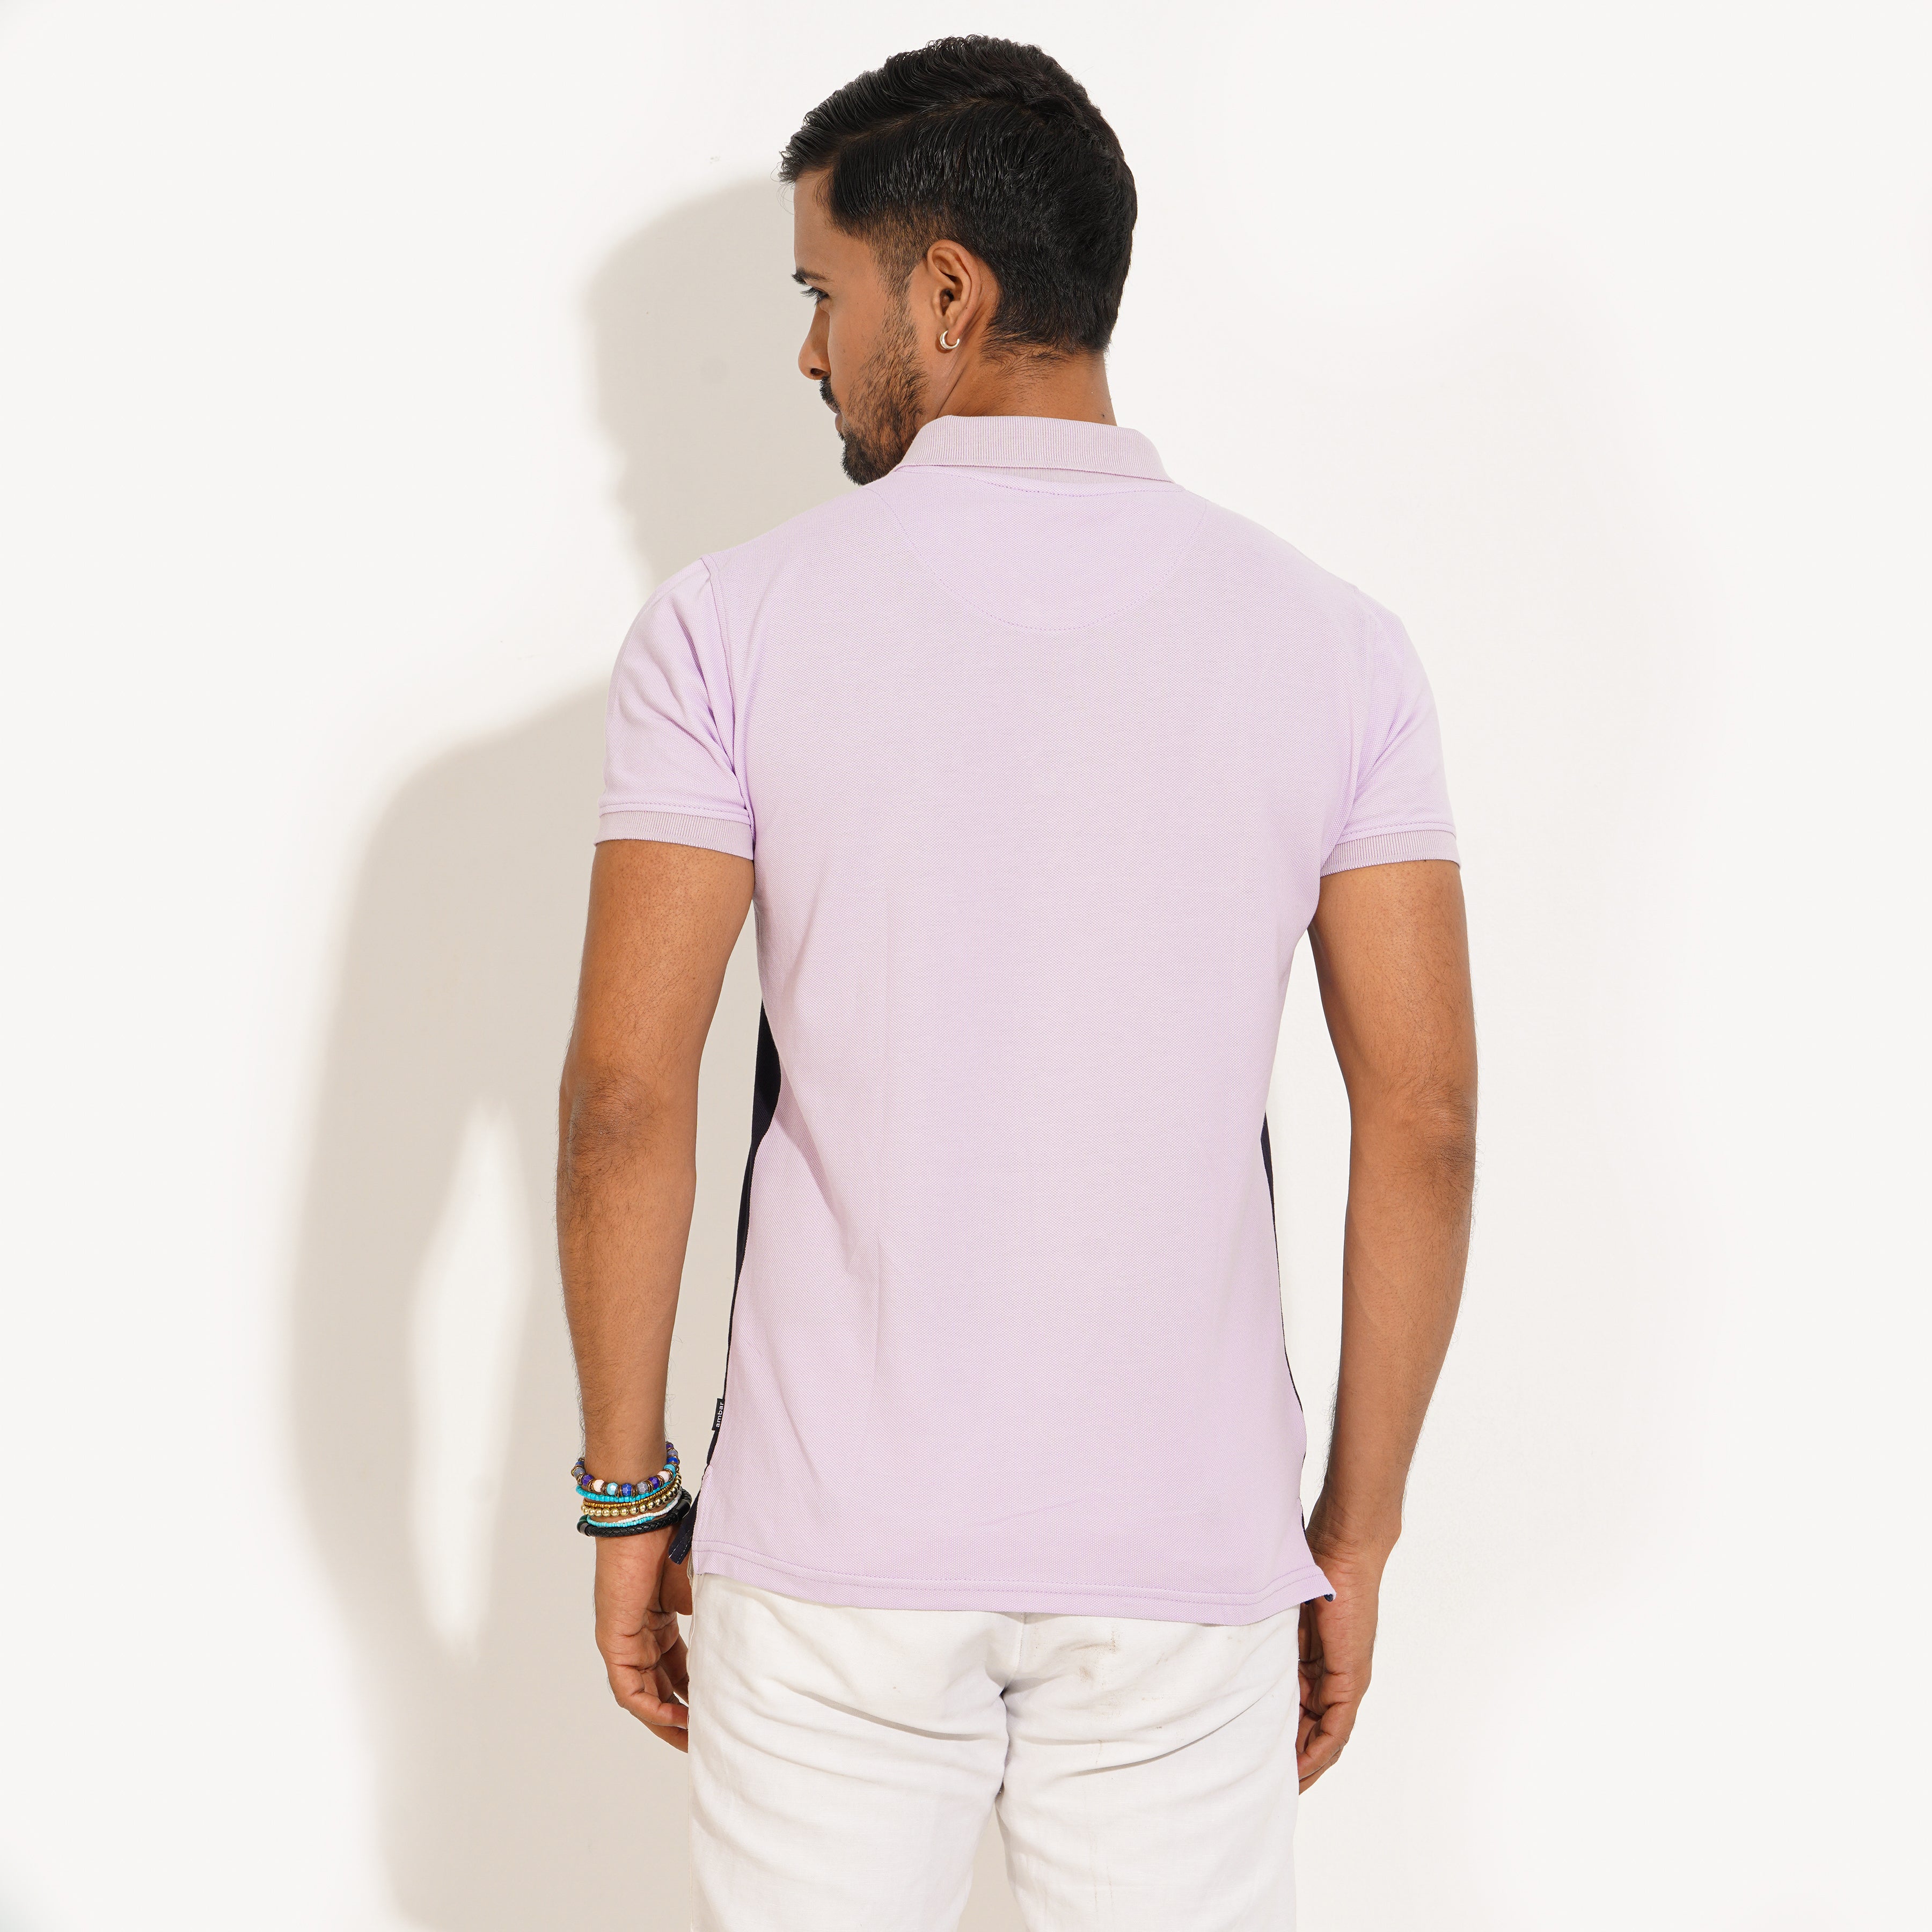  Polo Shirt for Men | Purple and Black contrast Polo